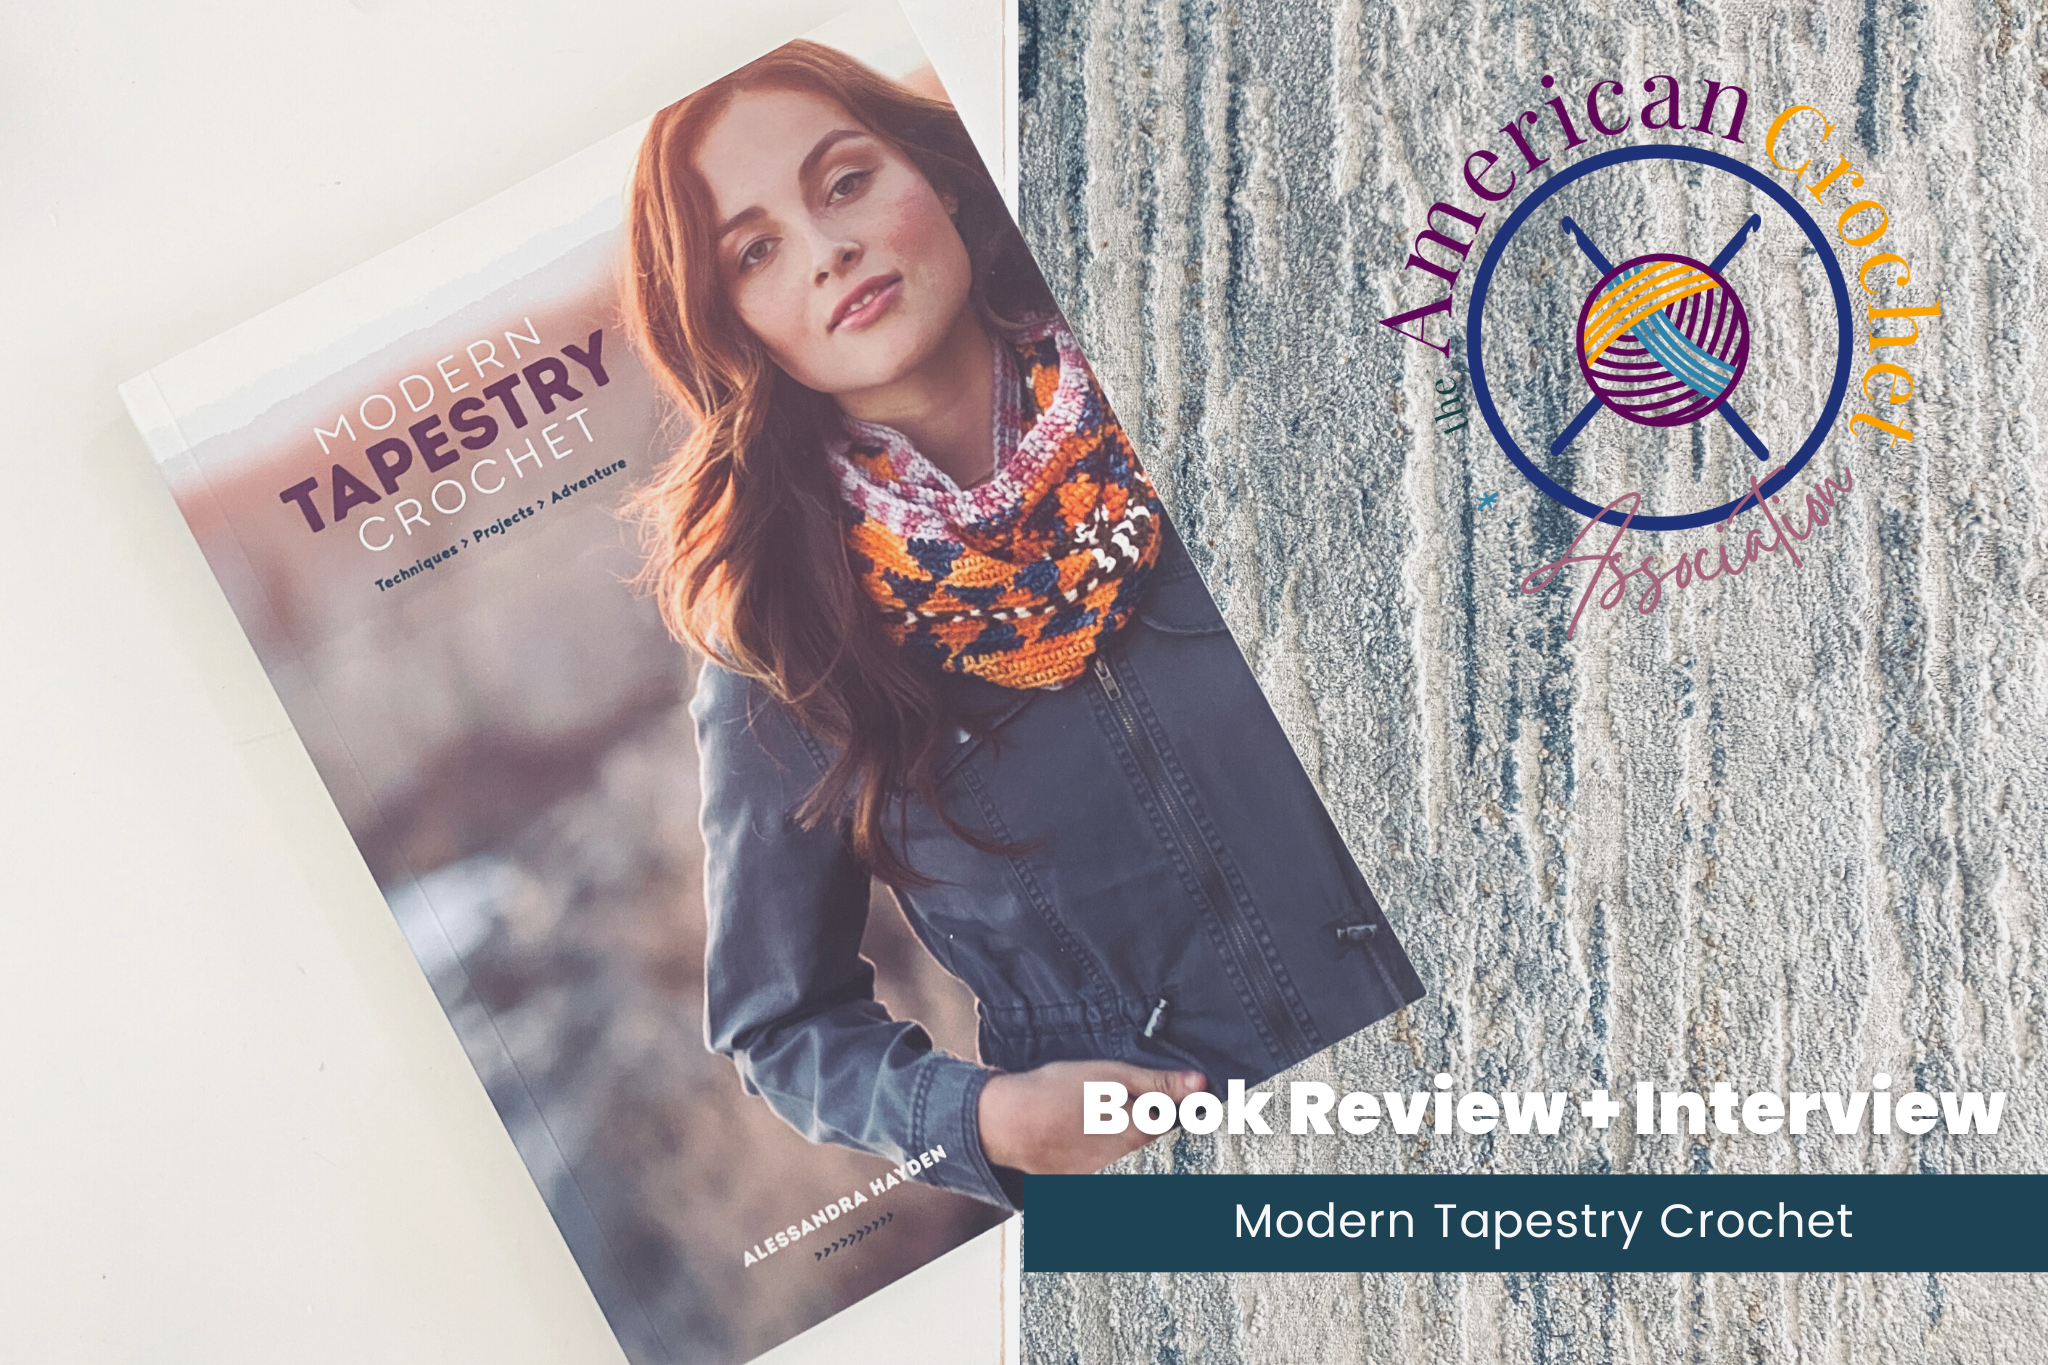 Modern Tapestry Crochet: Book Review & Author Interview